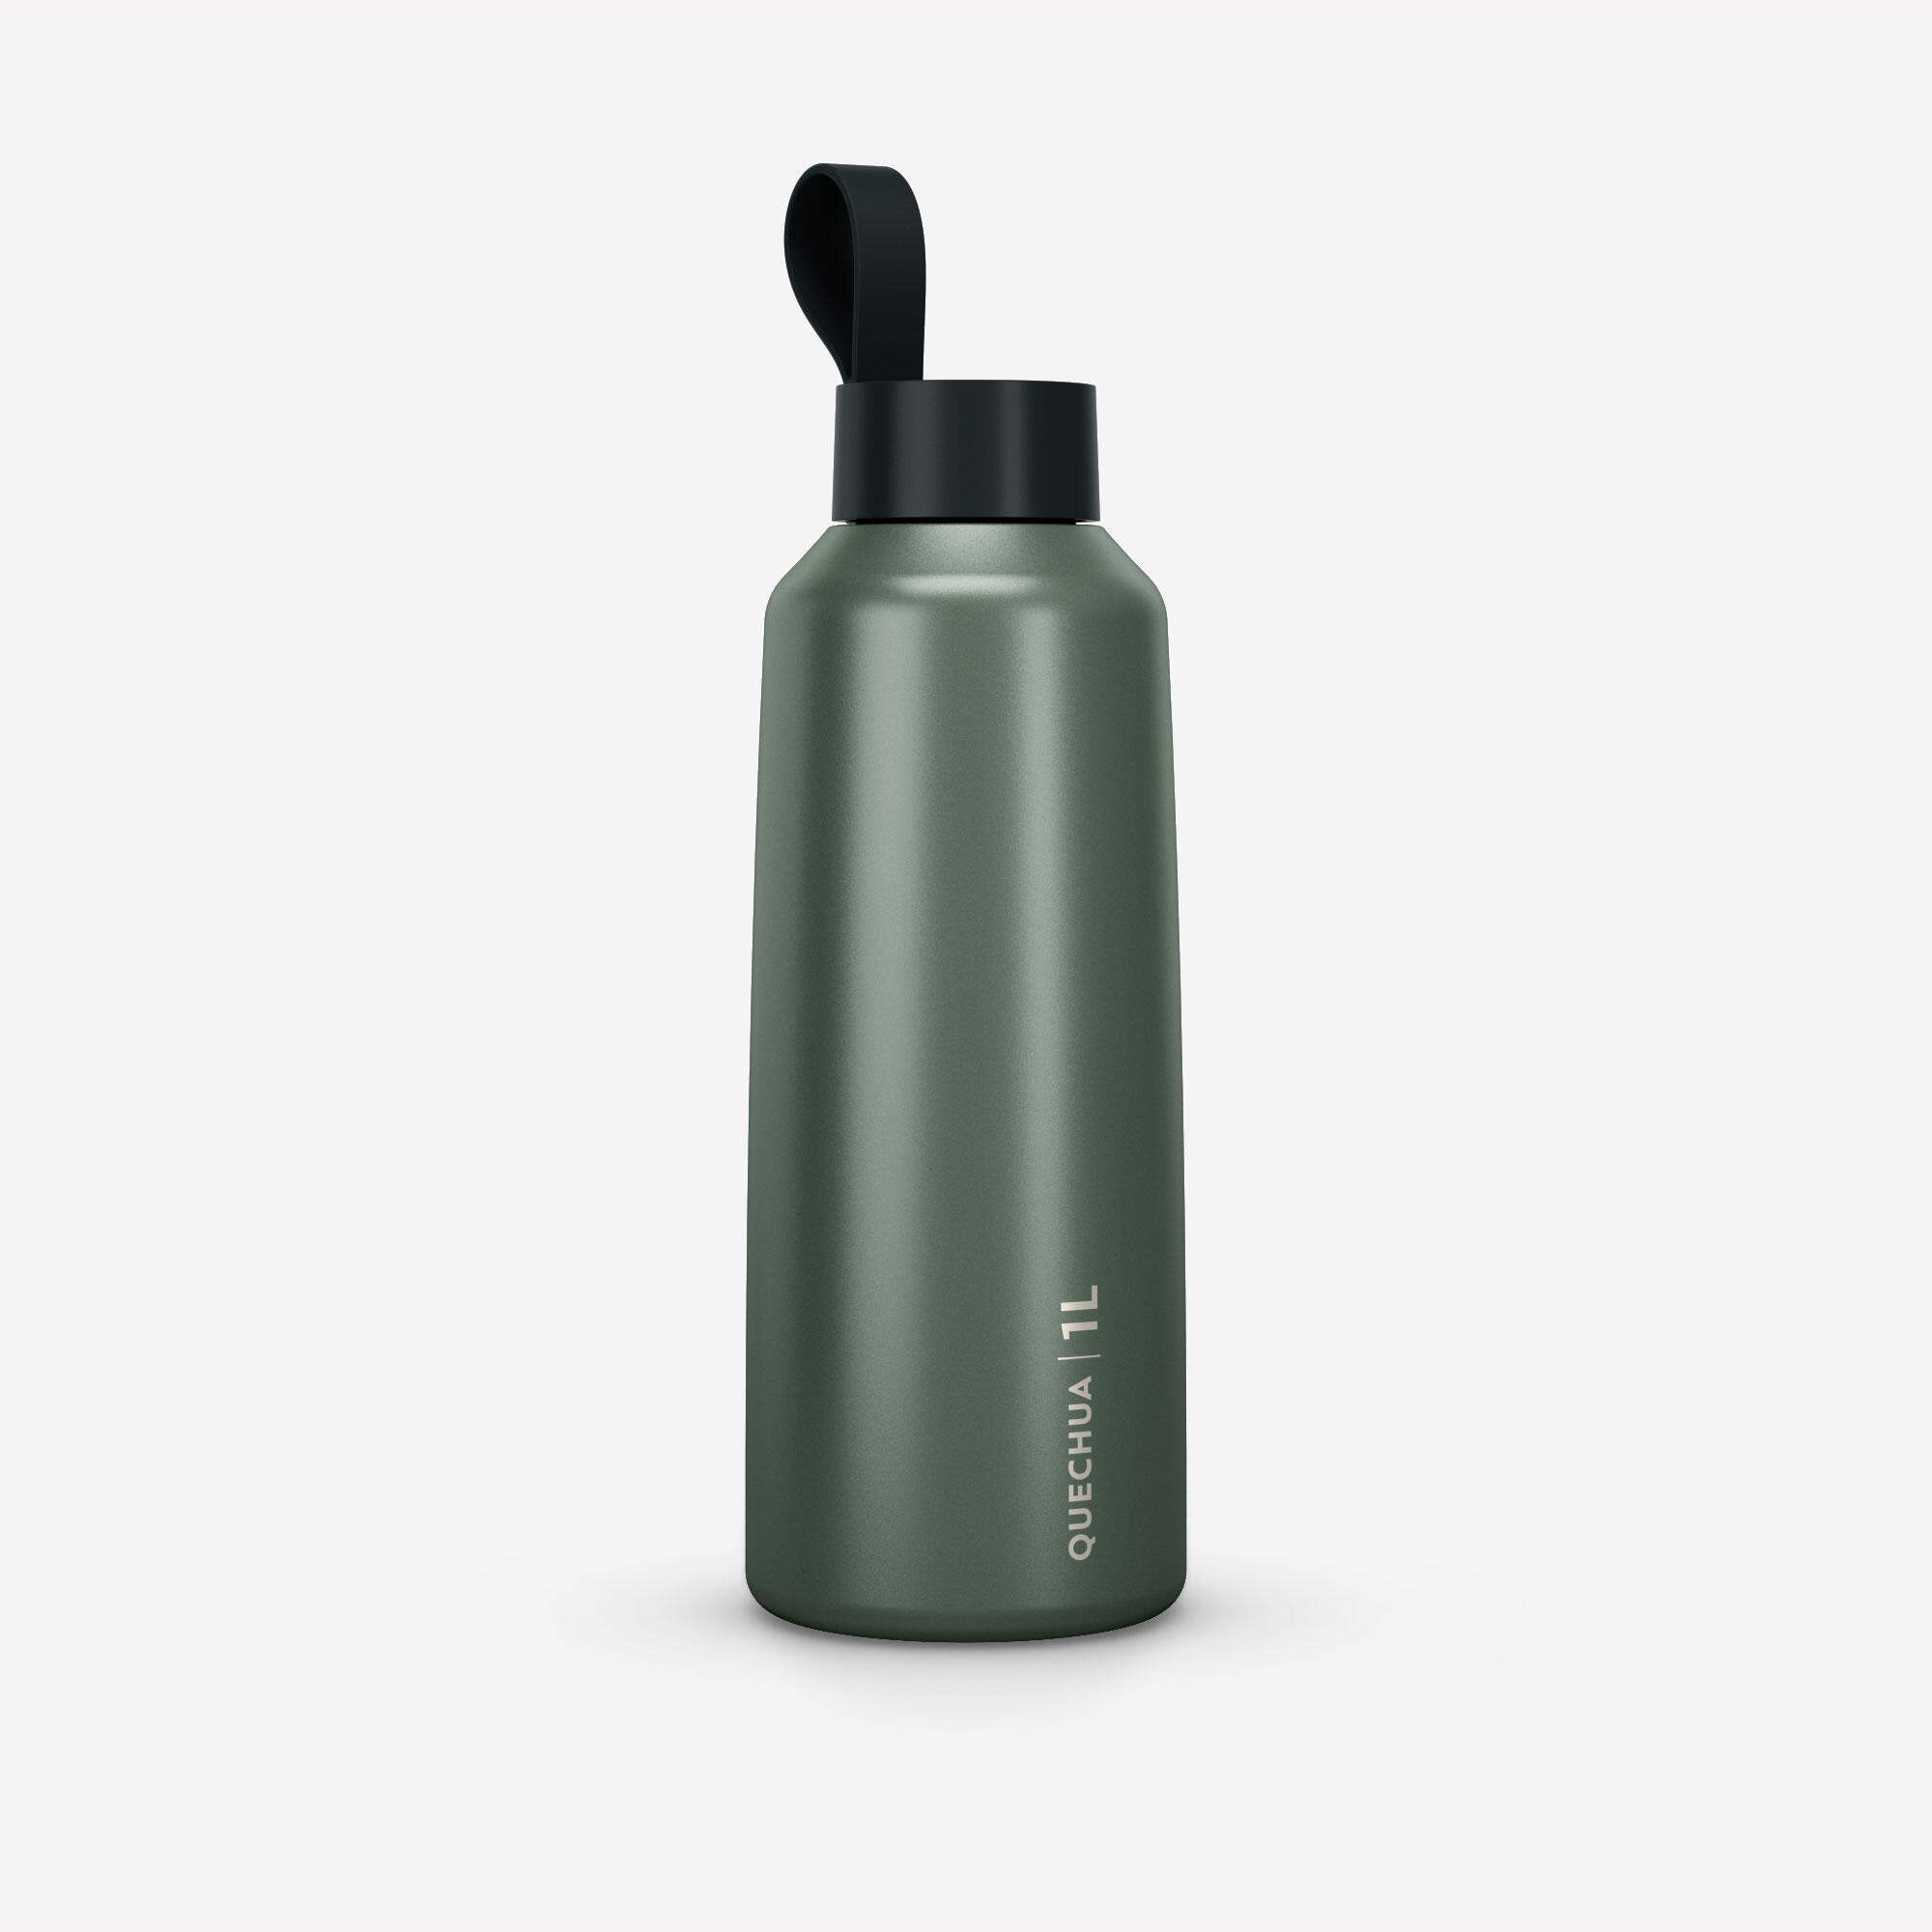 QUECHUA Stainless steel flask with screw cap for hiking 1 L - green